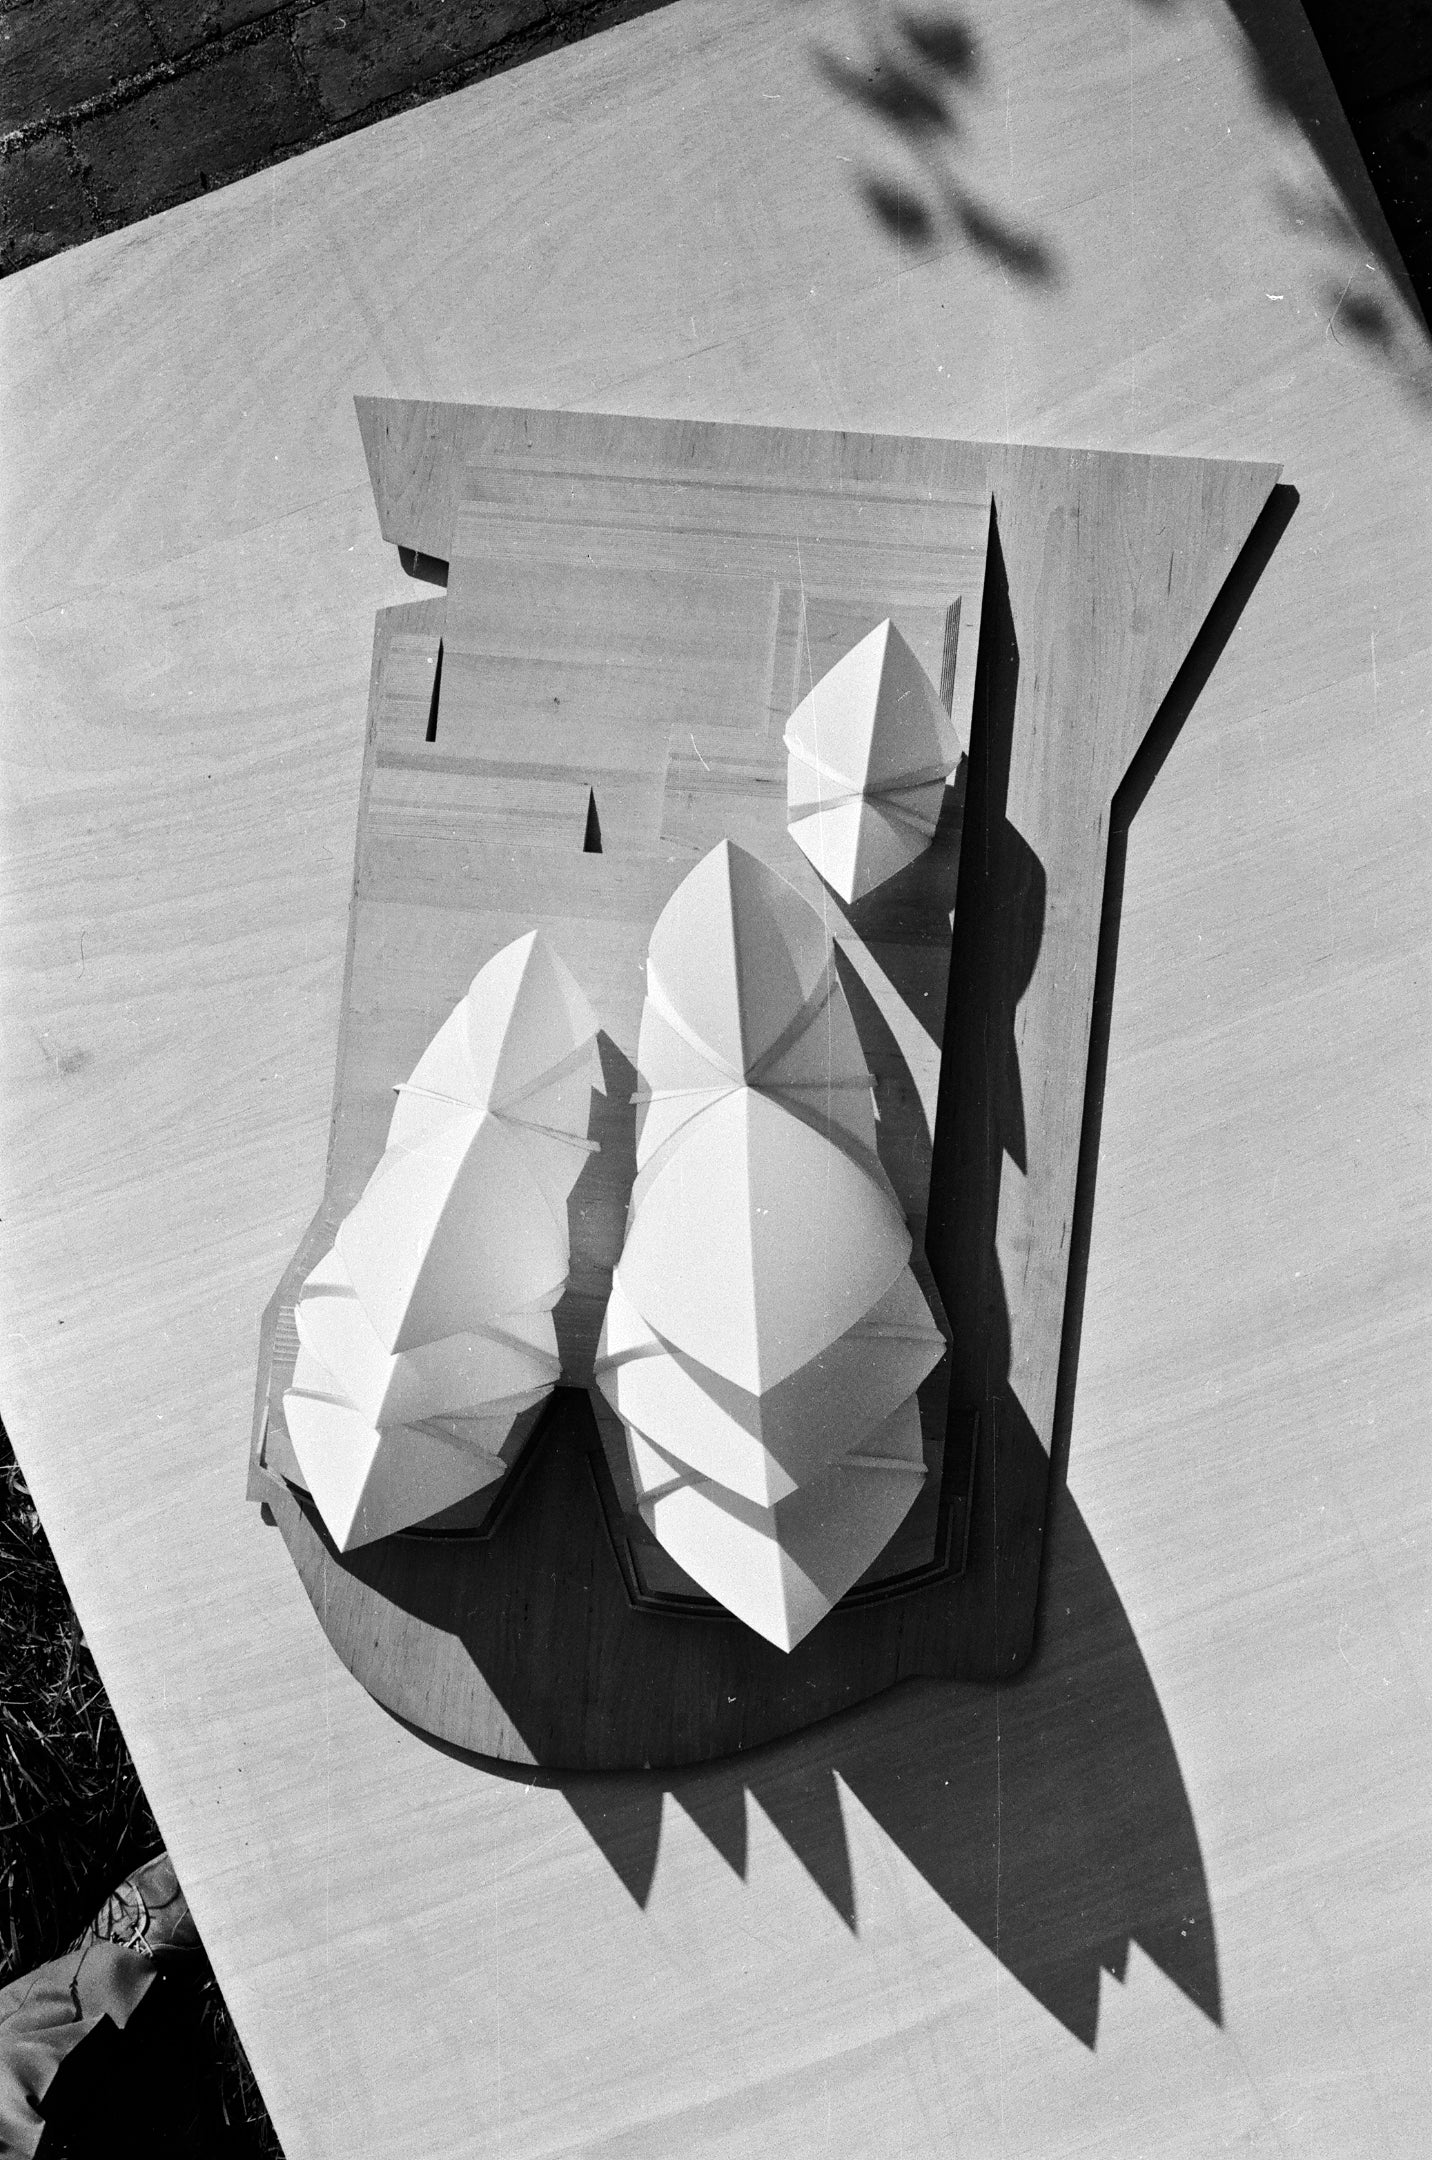 Model of the Sydney Opera House, photographed at the Hellebæk House studio, c. 1961 Credit_The Utzon Archives Utzon Center ©.jpg__PID:d58d1936-81e0-481f-9680-2cc8db8a5ca4